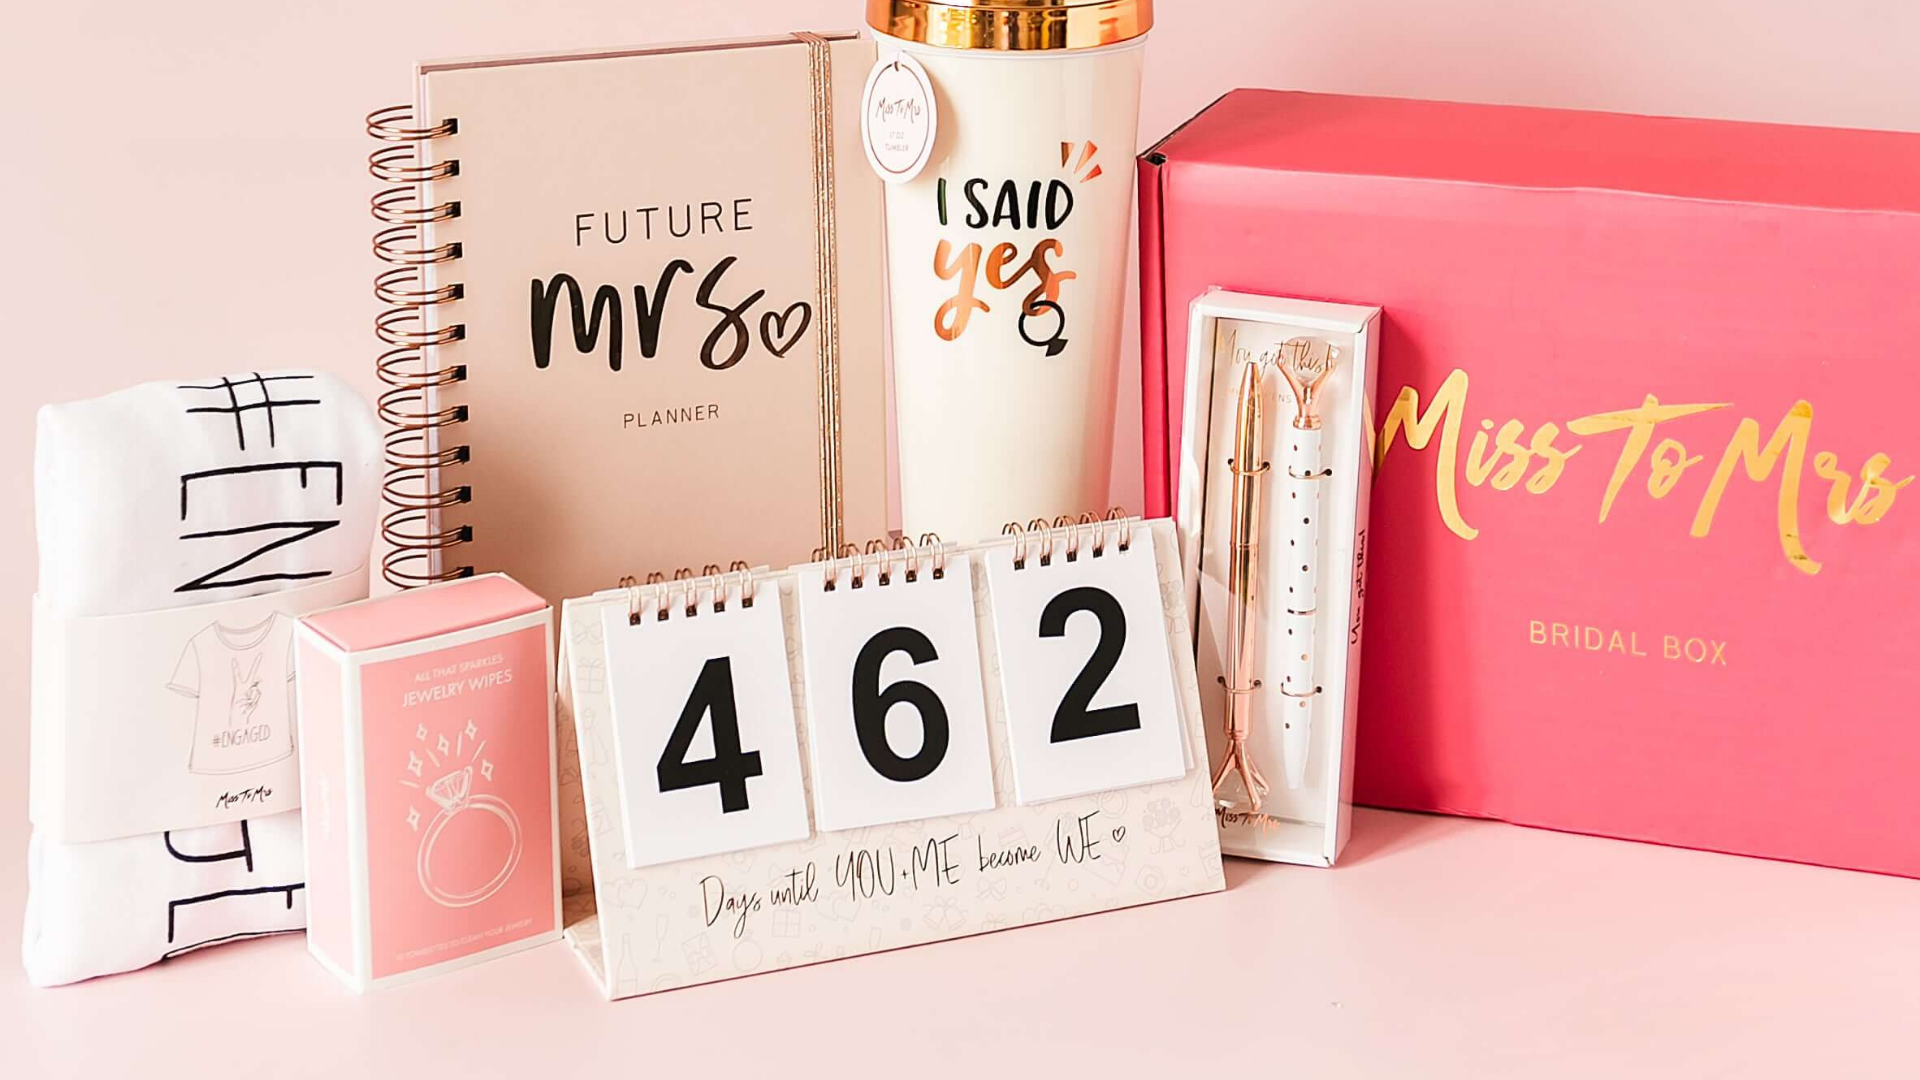 Bride-to-be gifts against a pink background